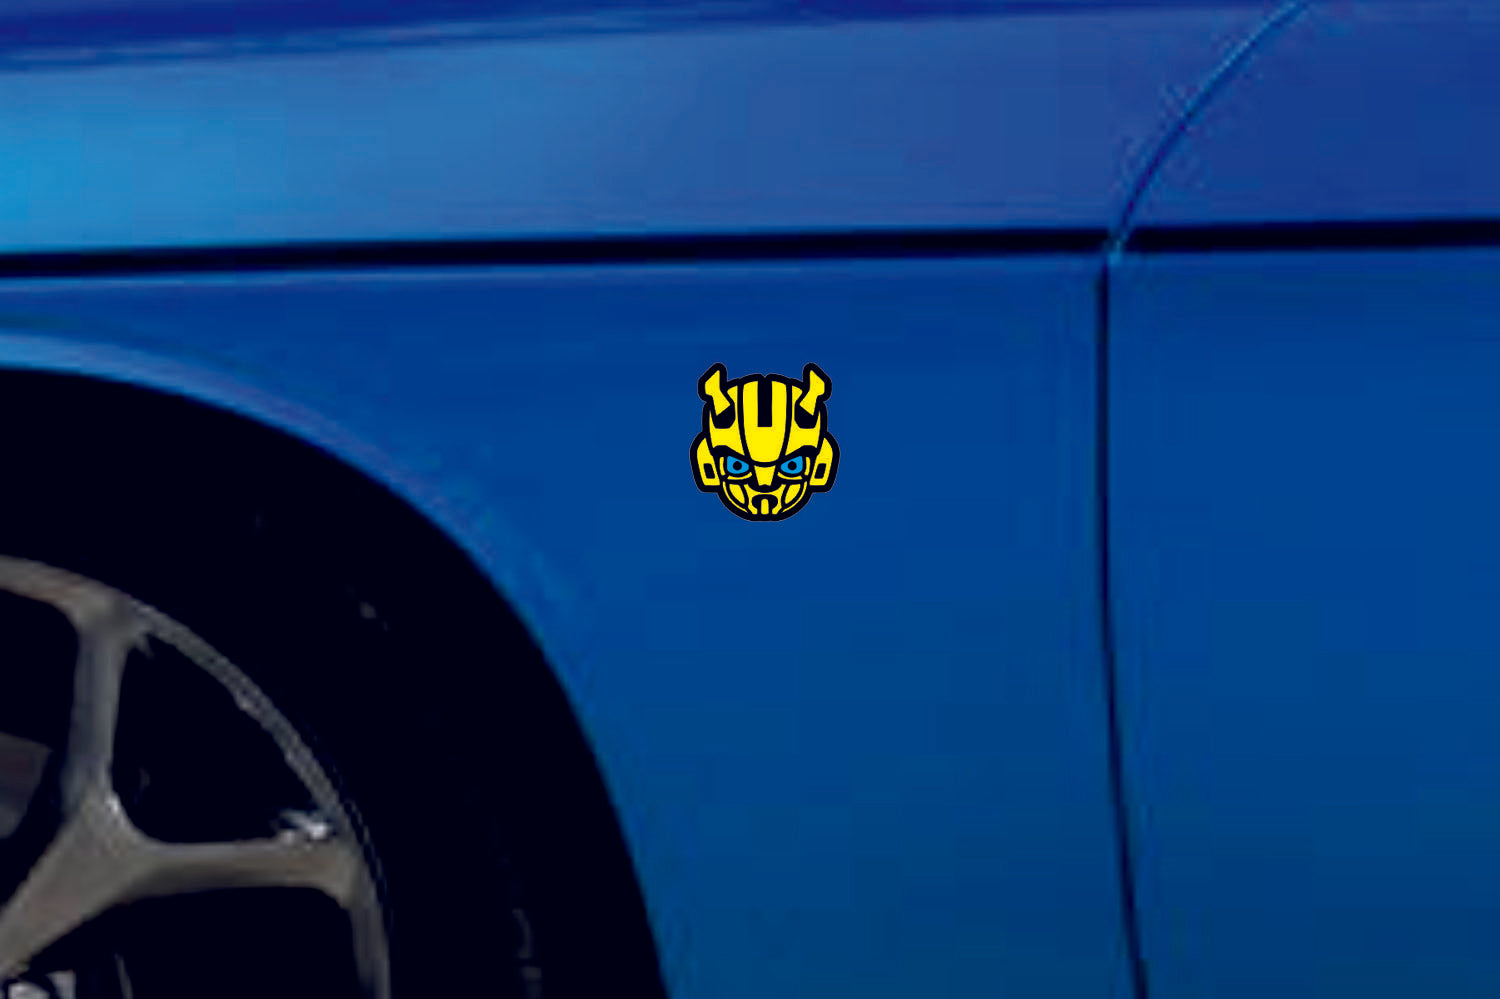 Chevrolet emblem for fenders with Bumblebee logo - decoinfabric